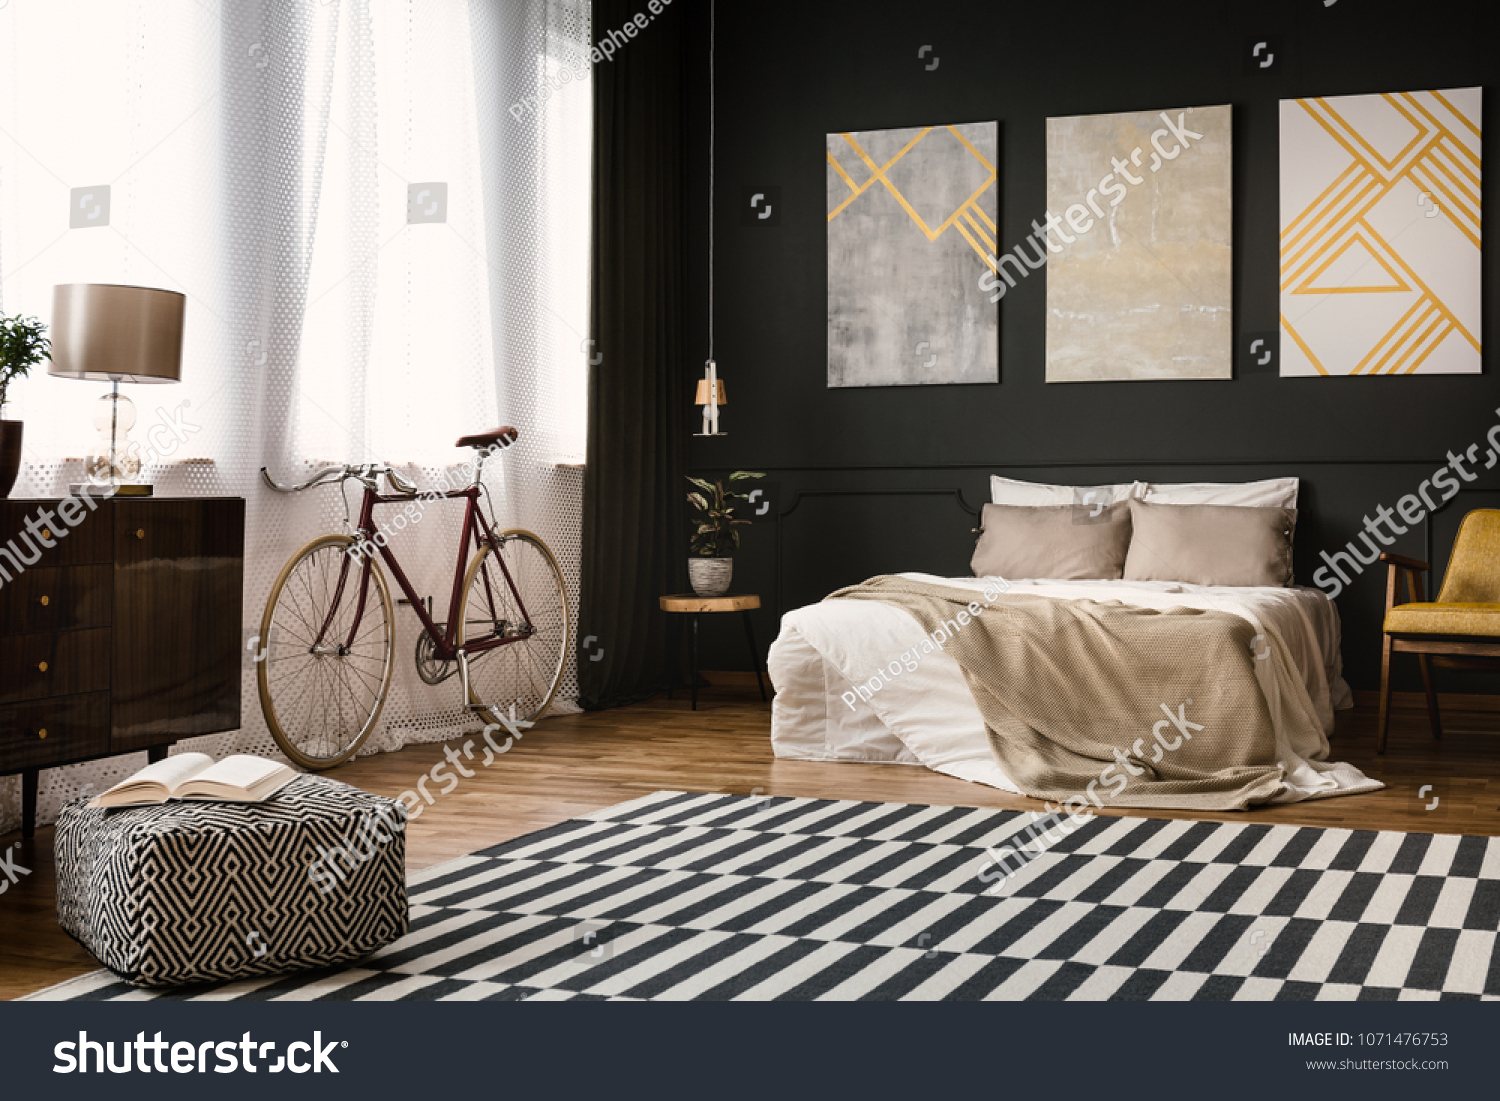 Vintage room interior with bed, bike, carpet on the floor and pouf #1071476753